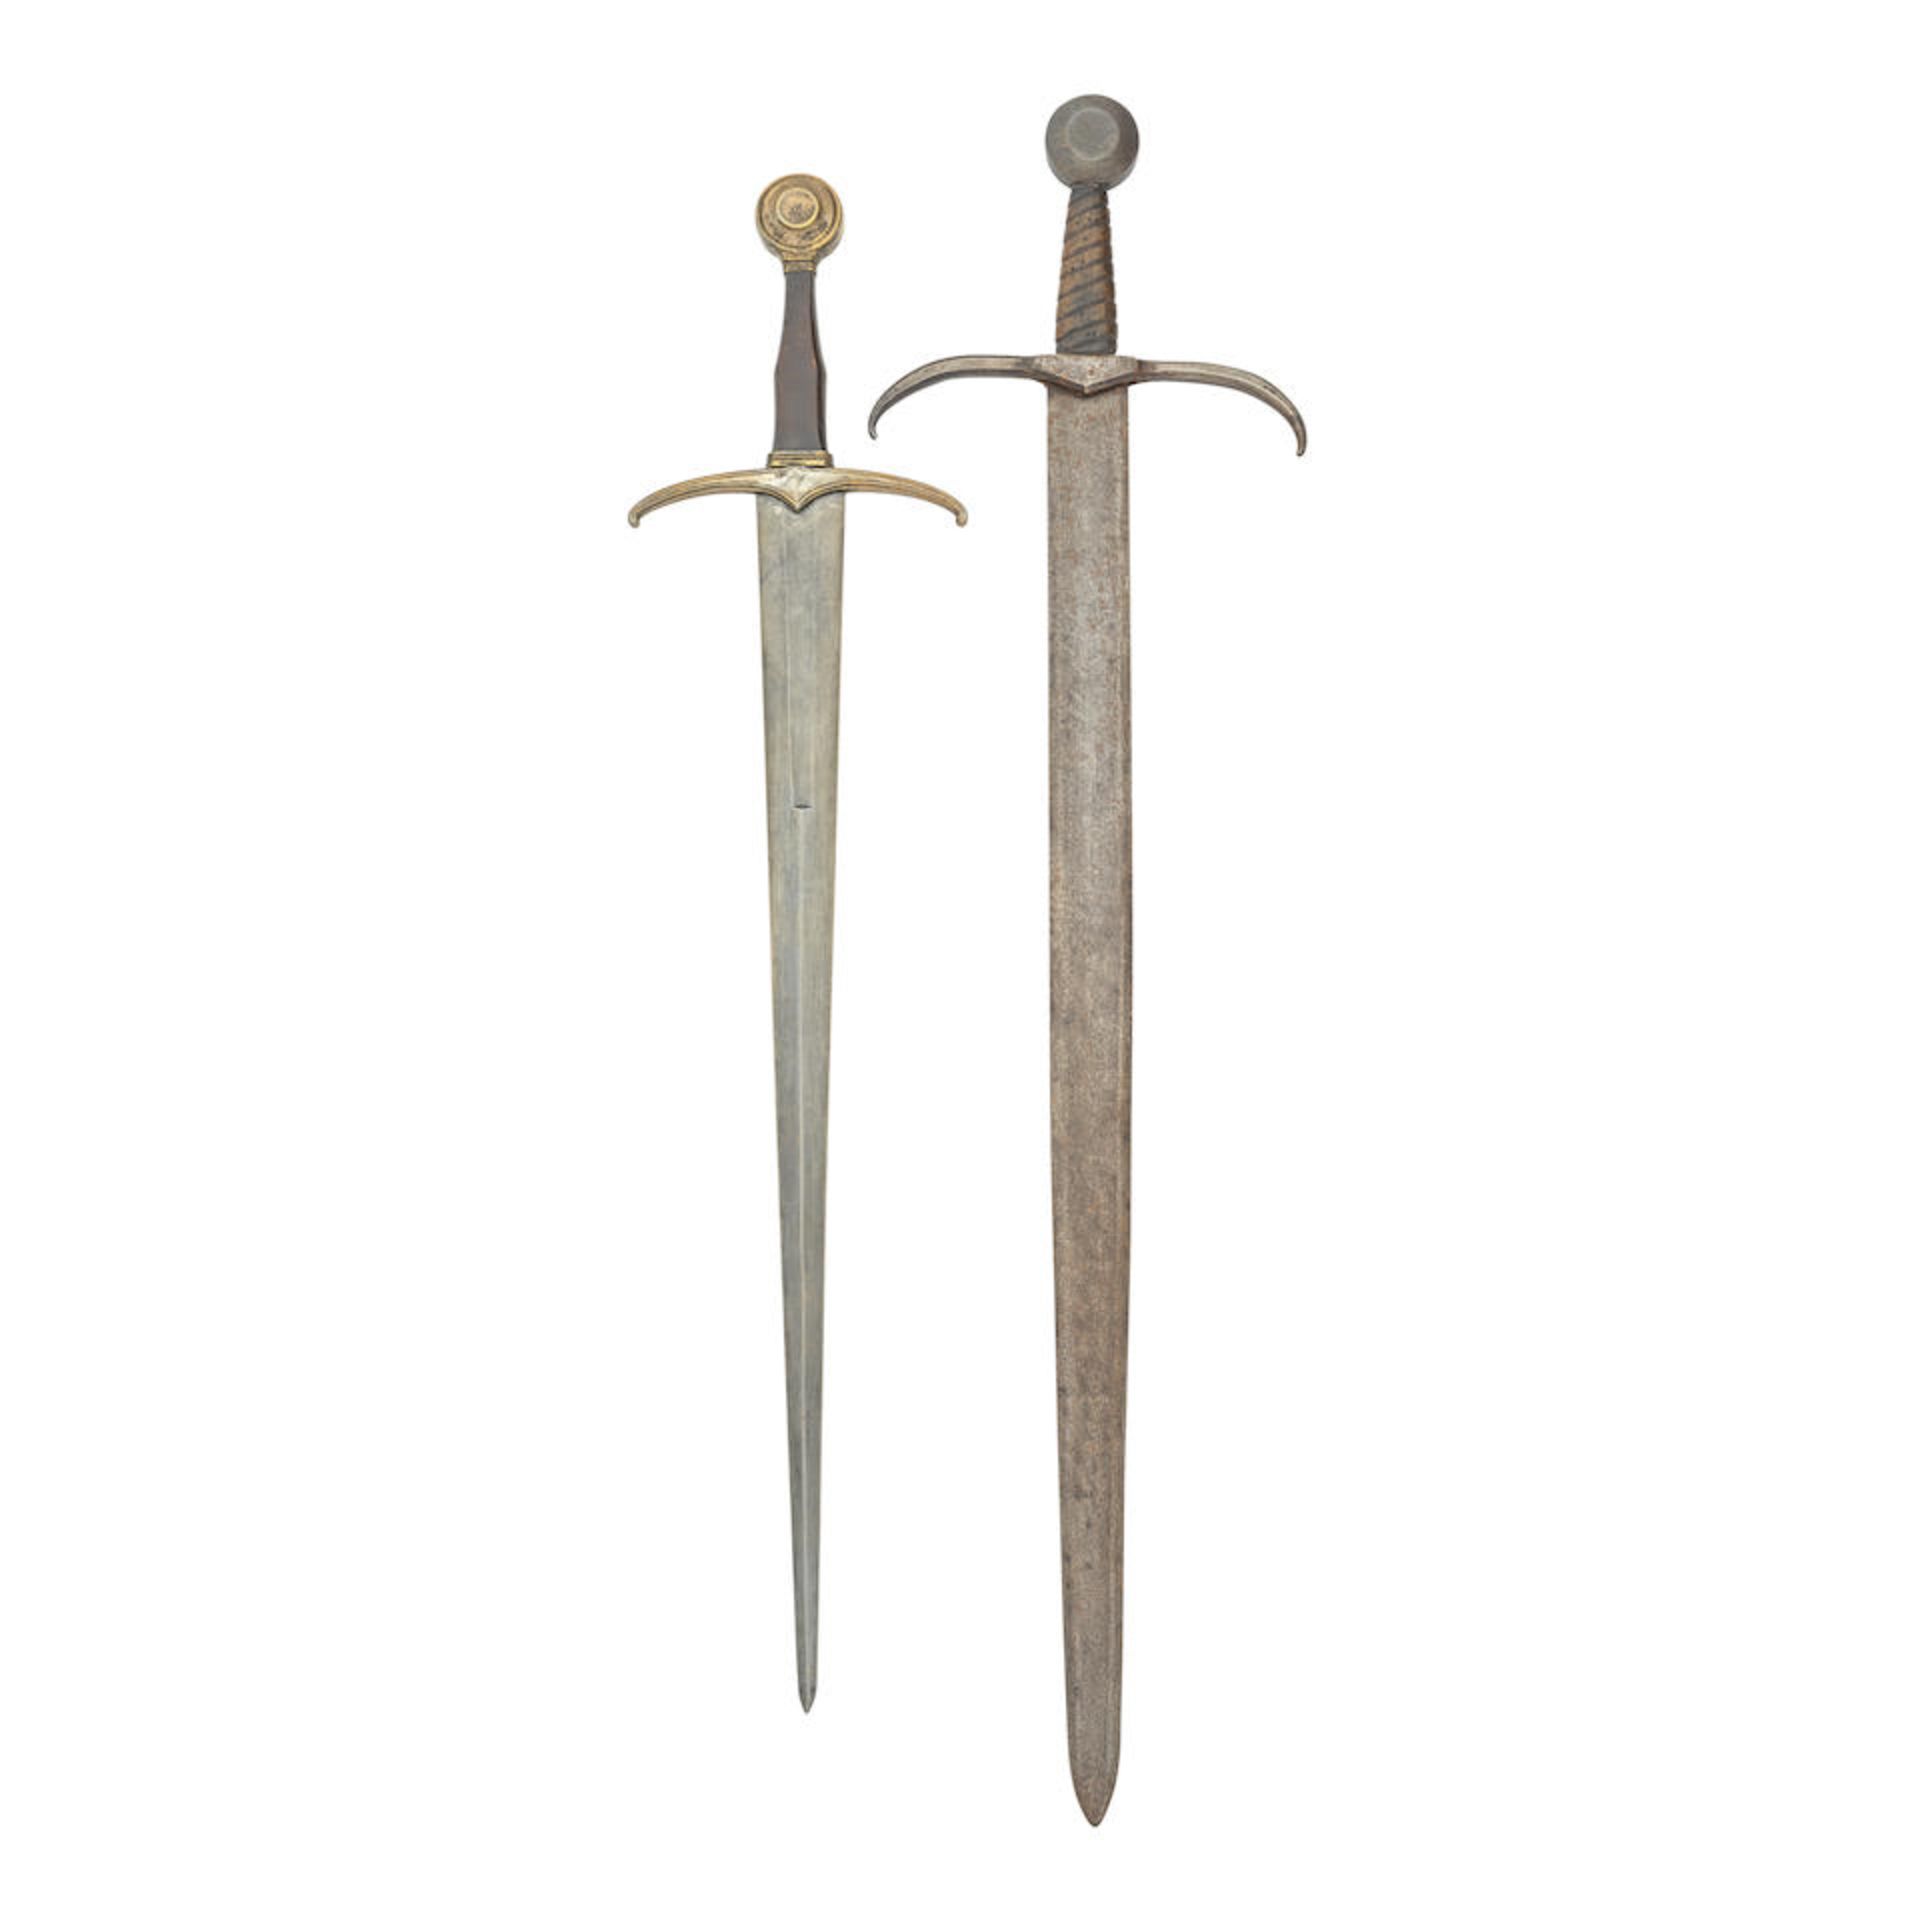 Two Reproduction Knightly Swords In Medieval Style